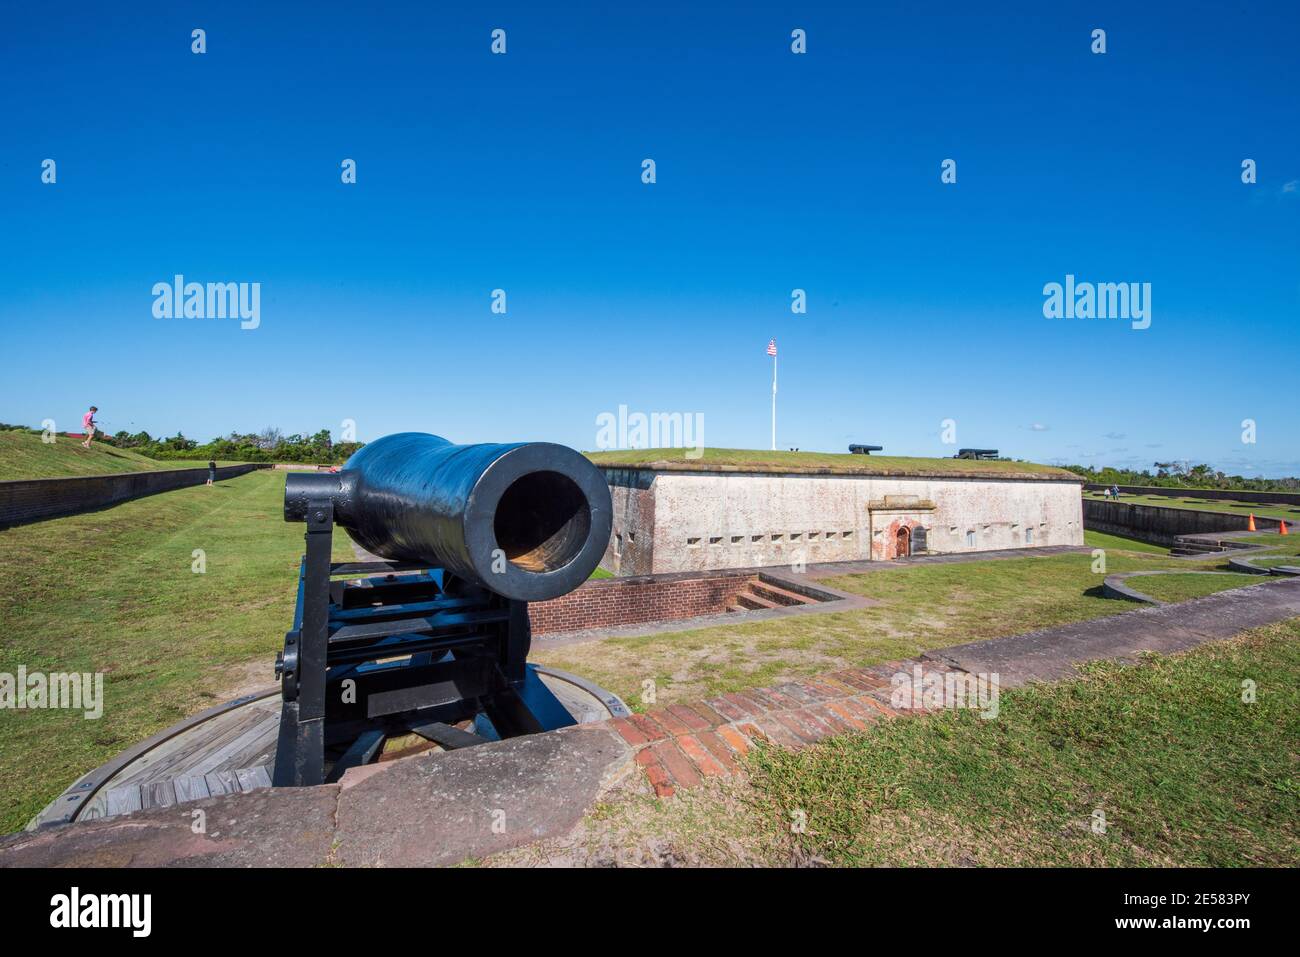 View of Model 1861 Confederate Rodman 10-inch Columbiad cannon at Fort Macon State Park in Atlantic Beach, NC. Fort Macon was constructed after the Wa Stock Photo